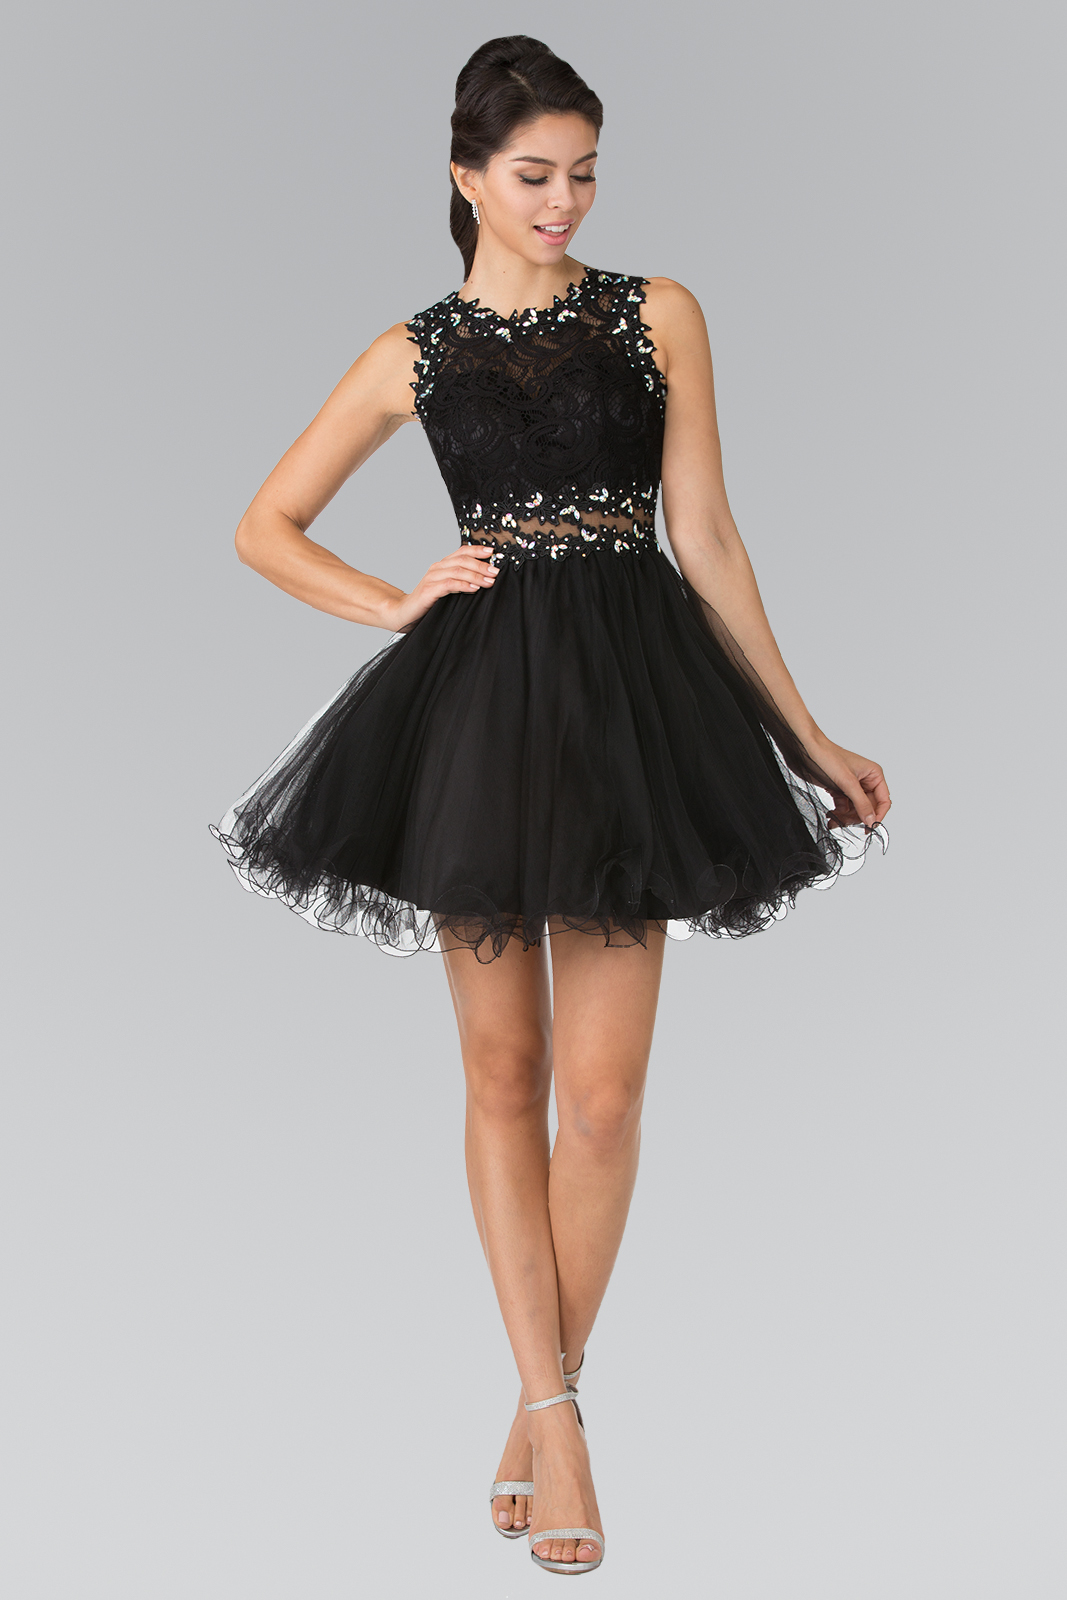 gs1427 black 1 short homecoming cocktail bridesmaids damas lace tulle covered back zipper sleeveless crew neck babydoll